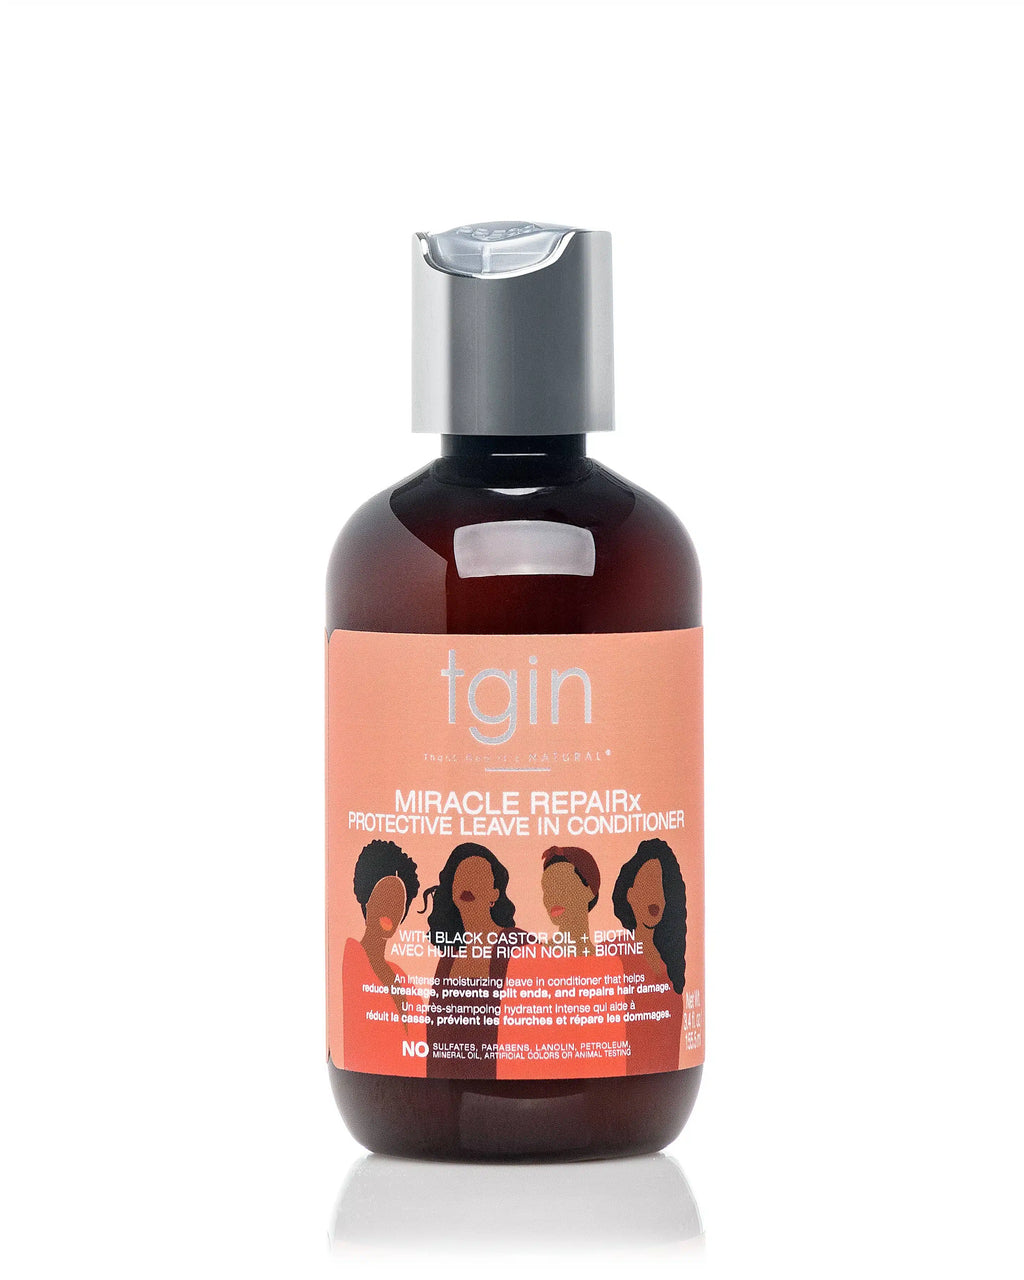 TGIN Limited Edition - Miracle RepaiRx Protective Leave in Conditioner